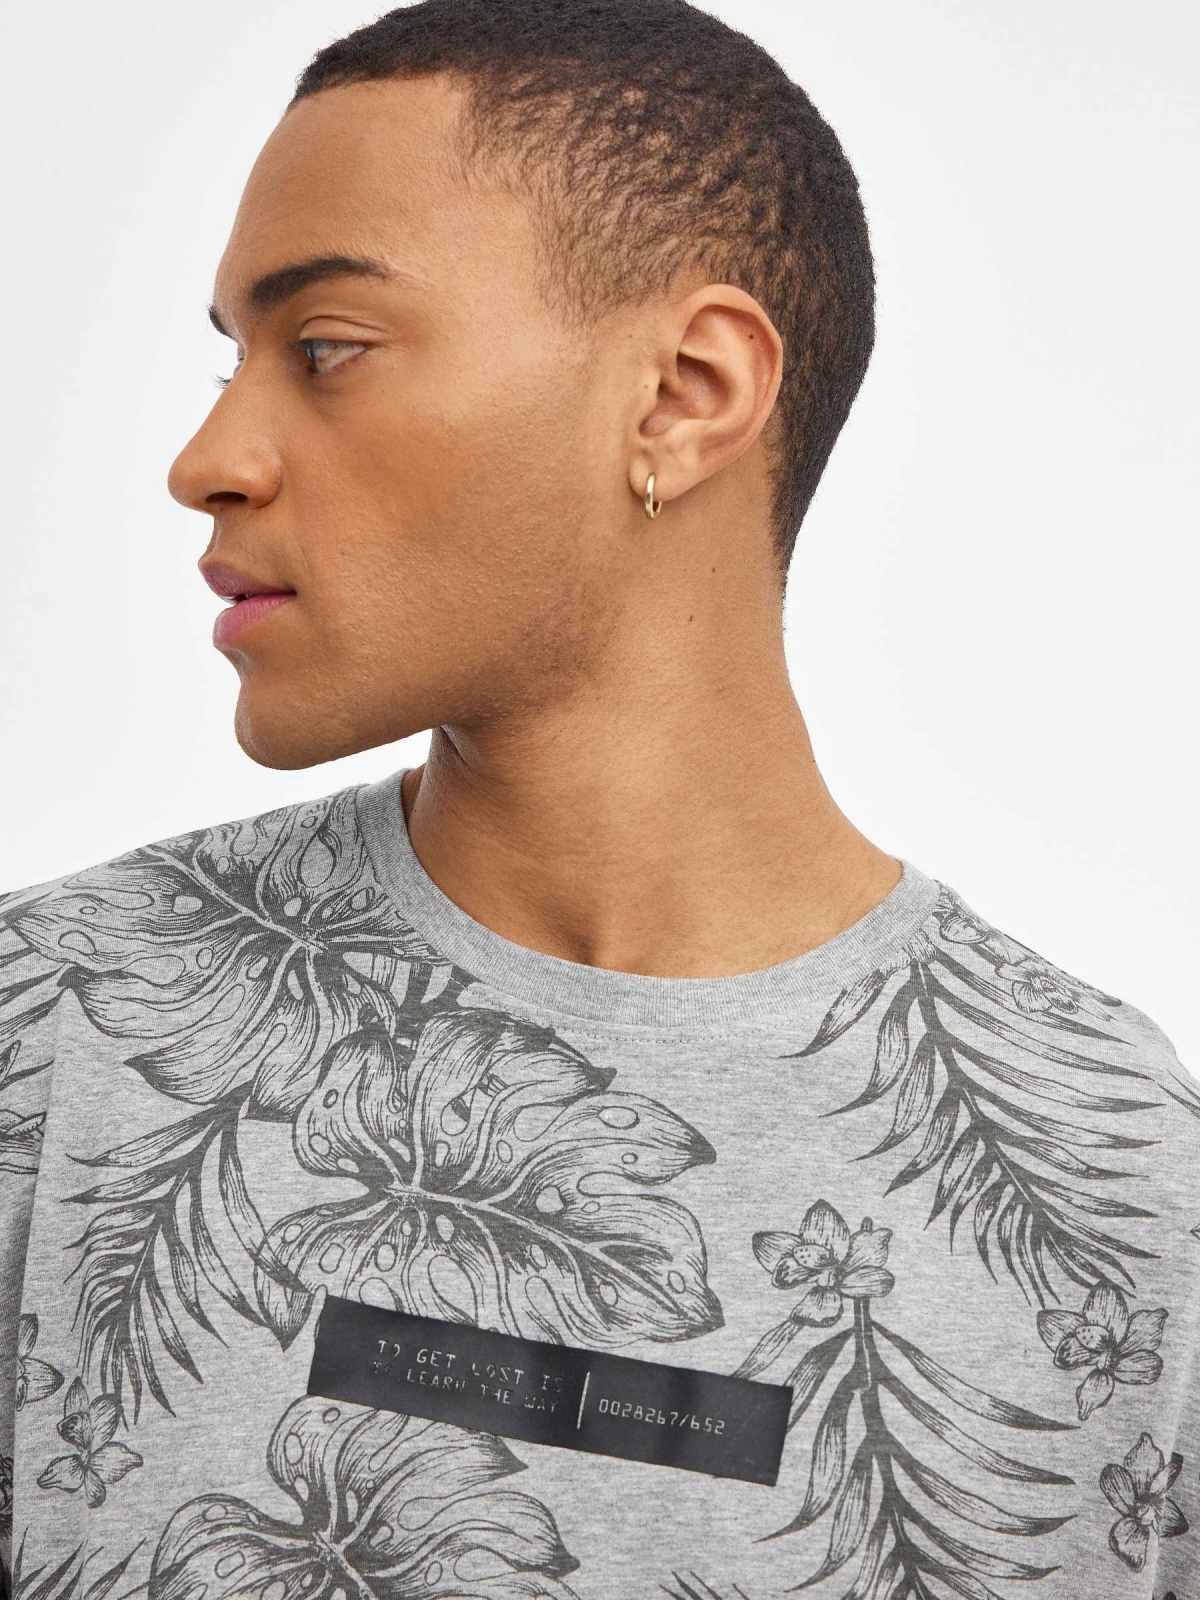 Tropical print t-shirt with graphic grey foreground